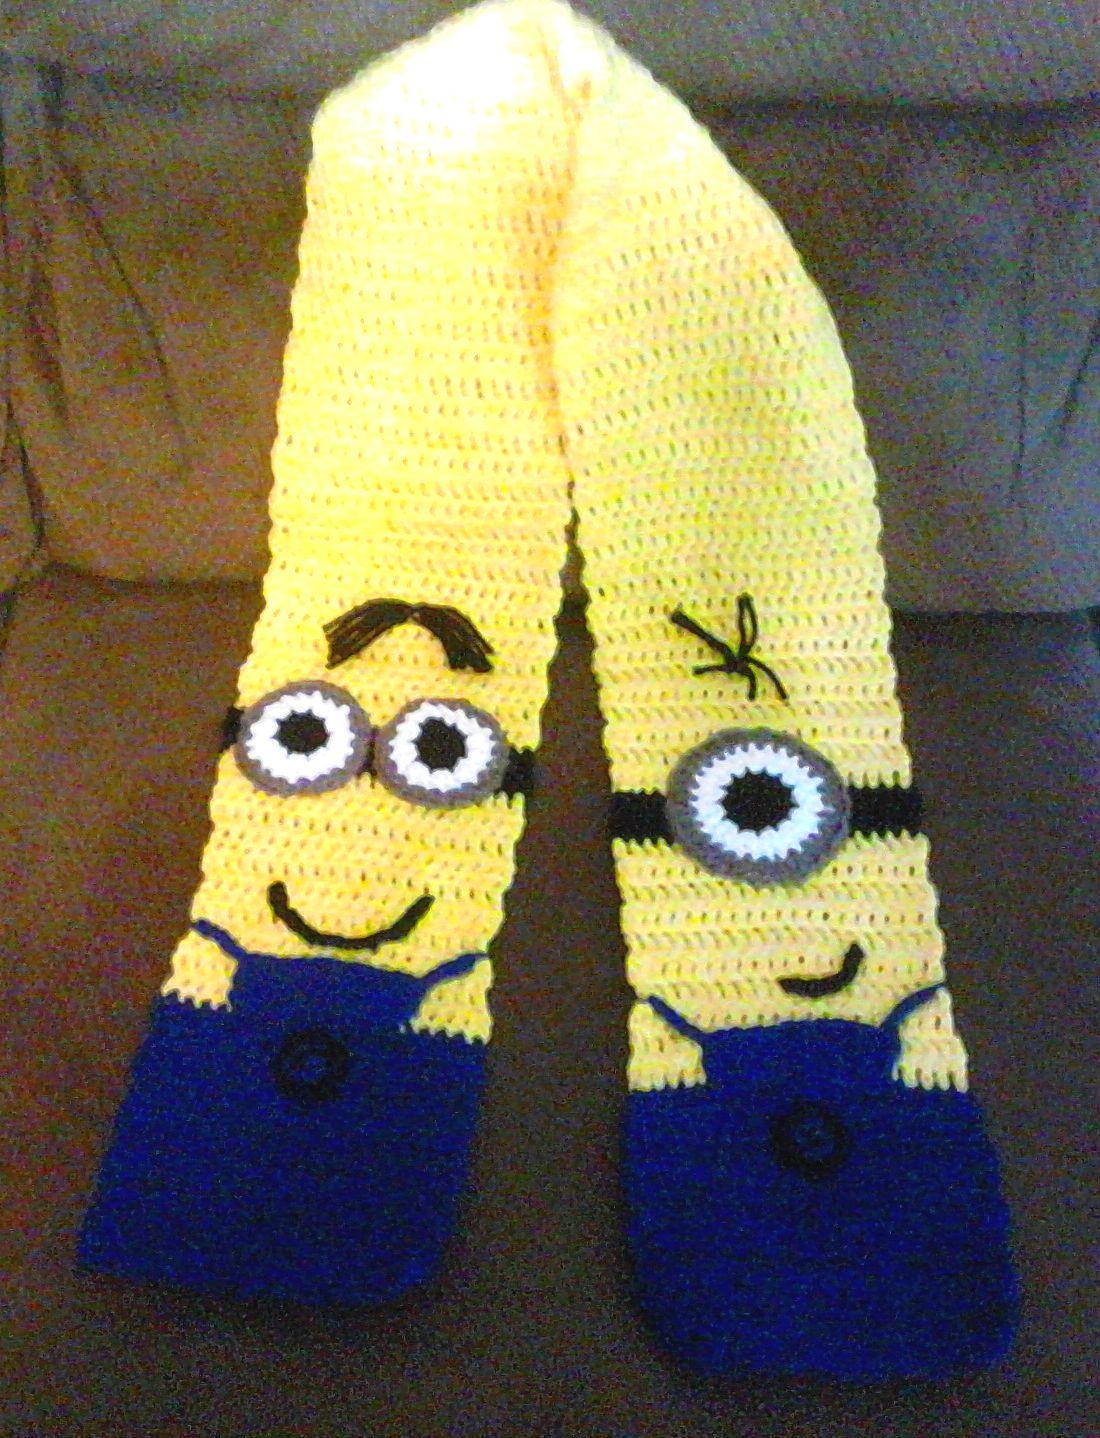 Crochet Minion Pattern Minion Inspired Scarf A Crochet Pattern For You Create